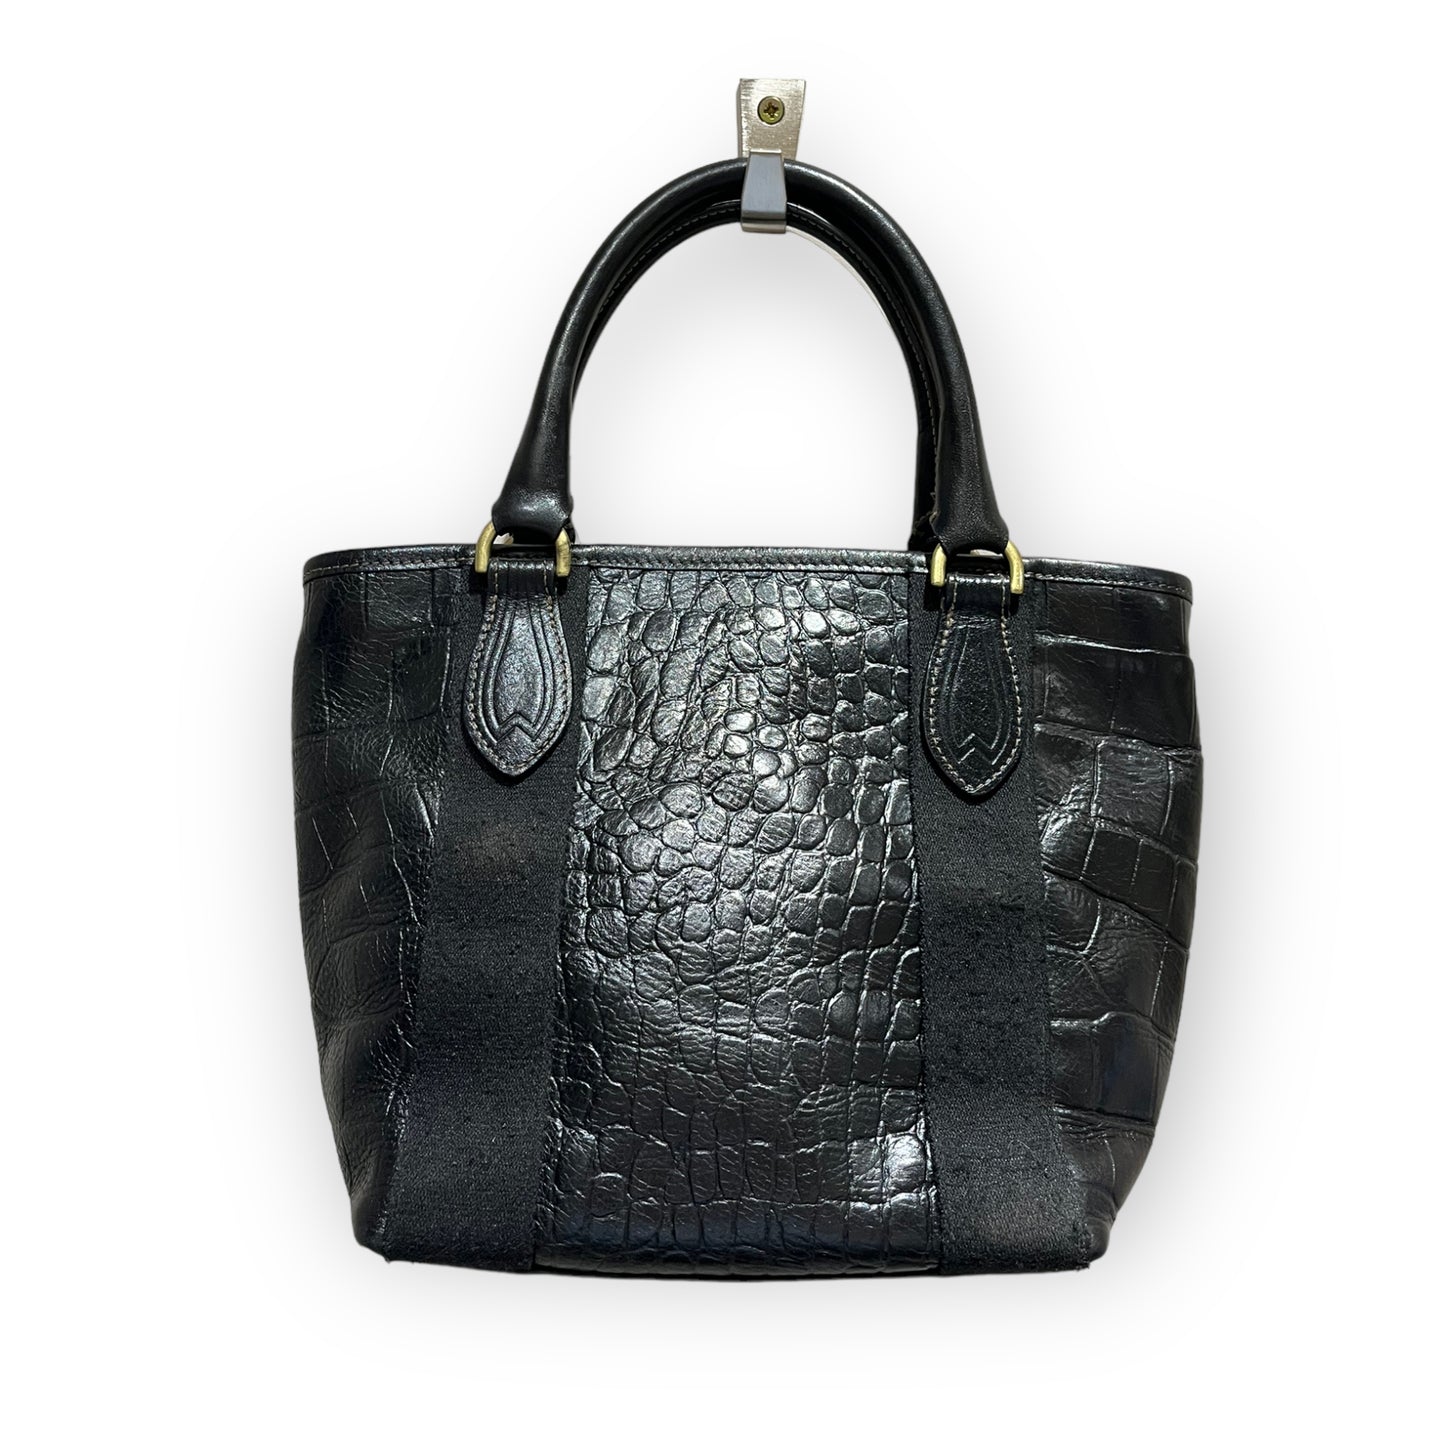 Mulberry Black Leather Bag